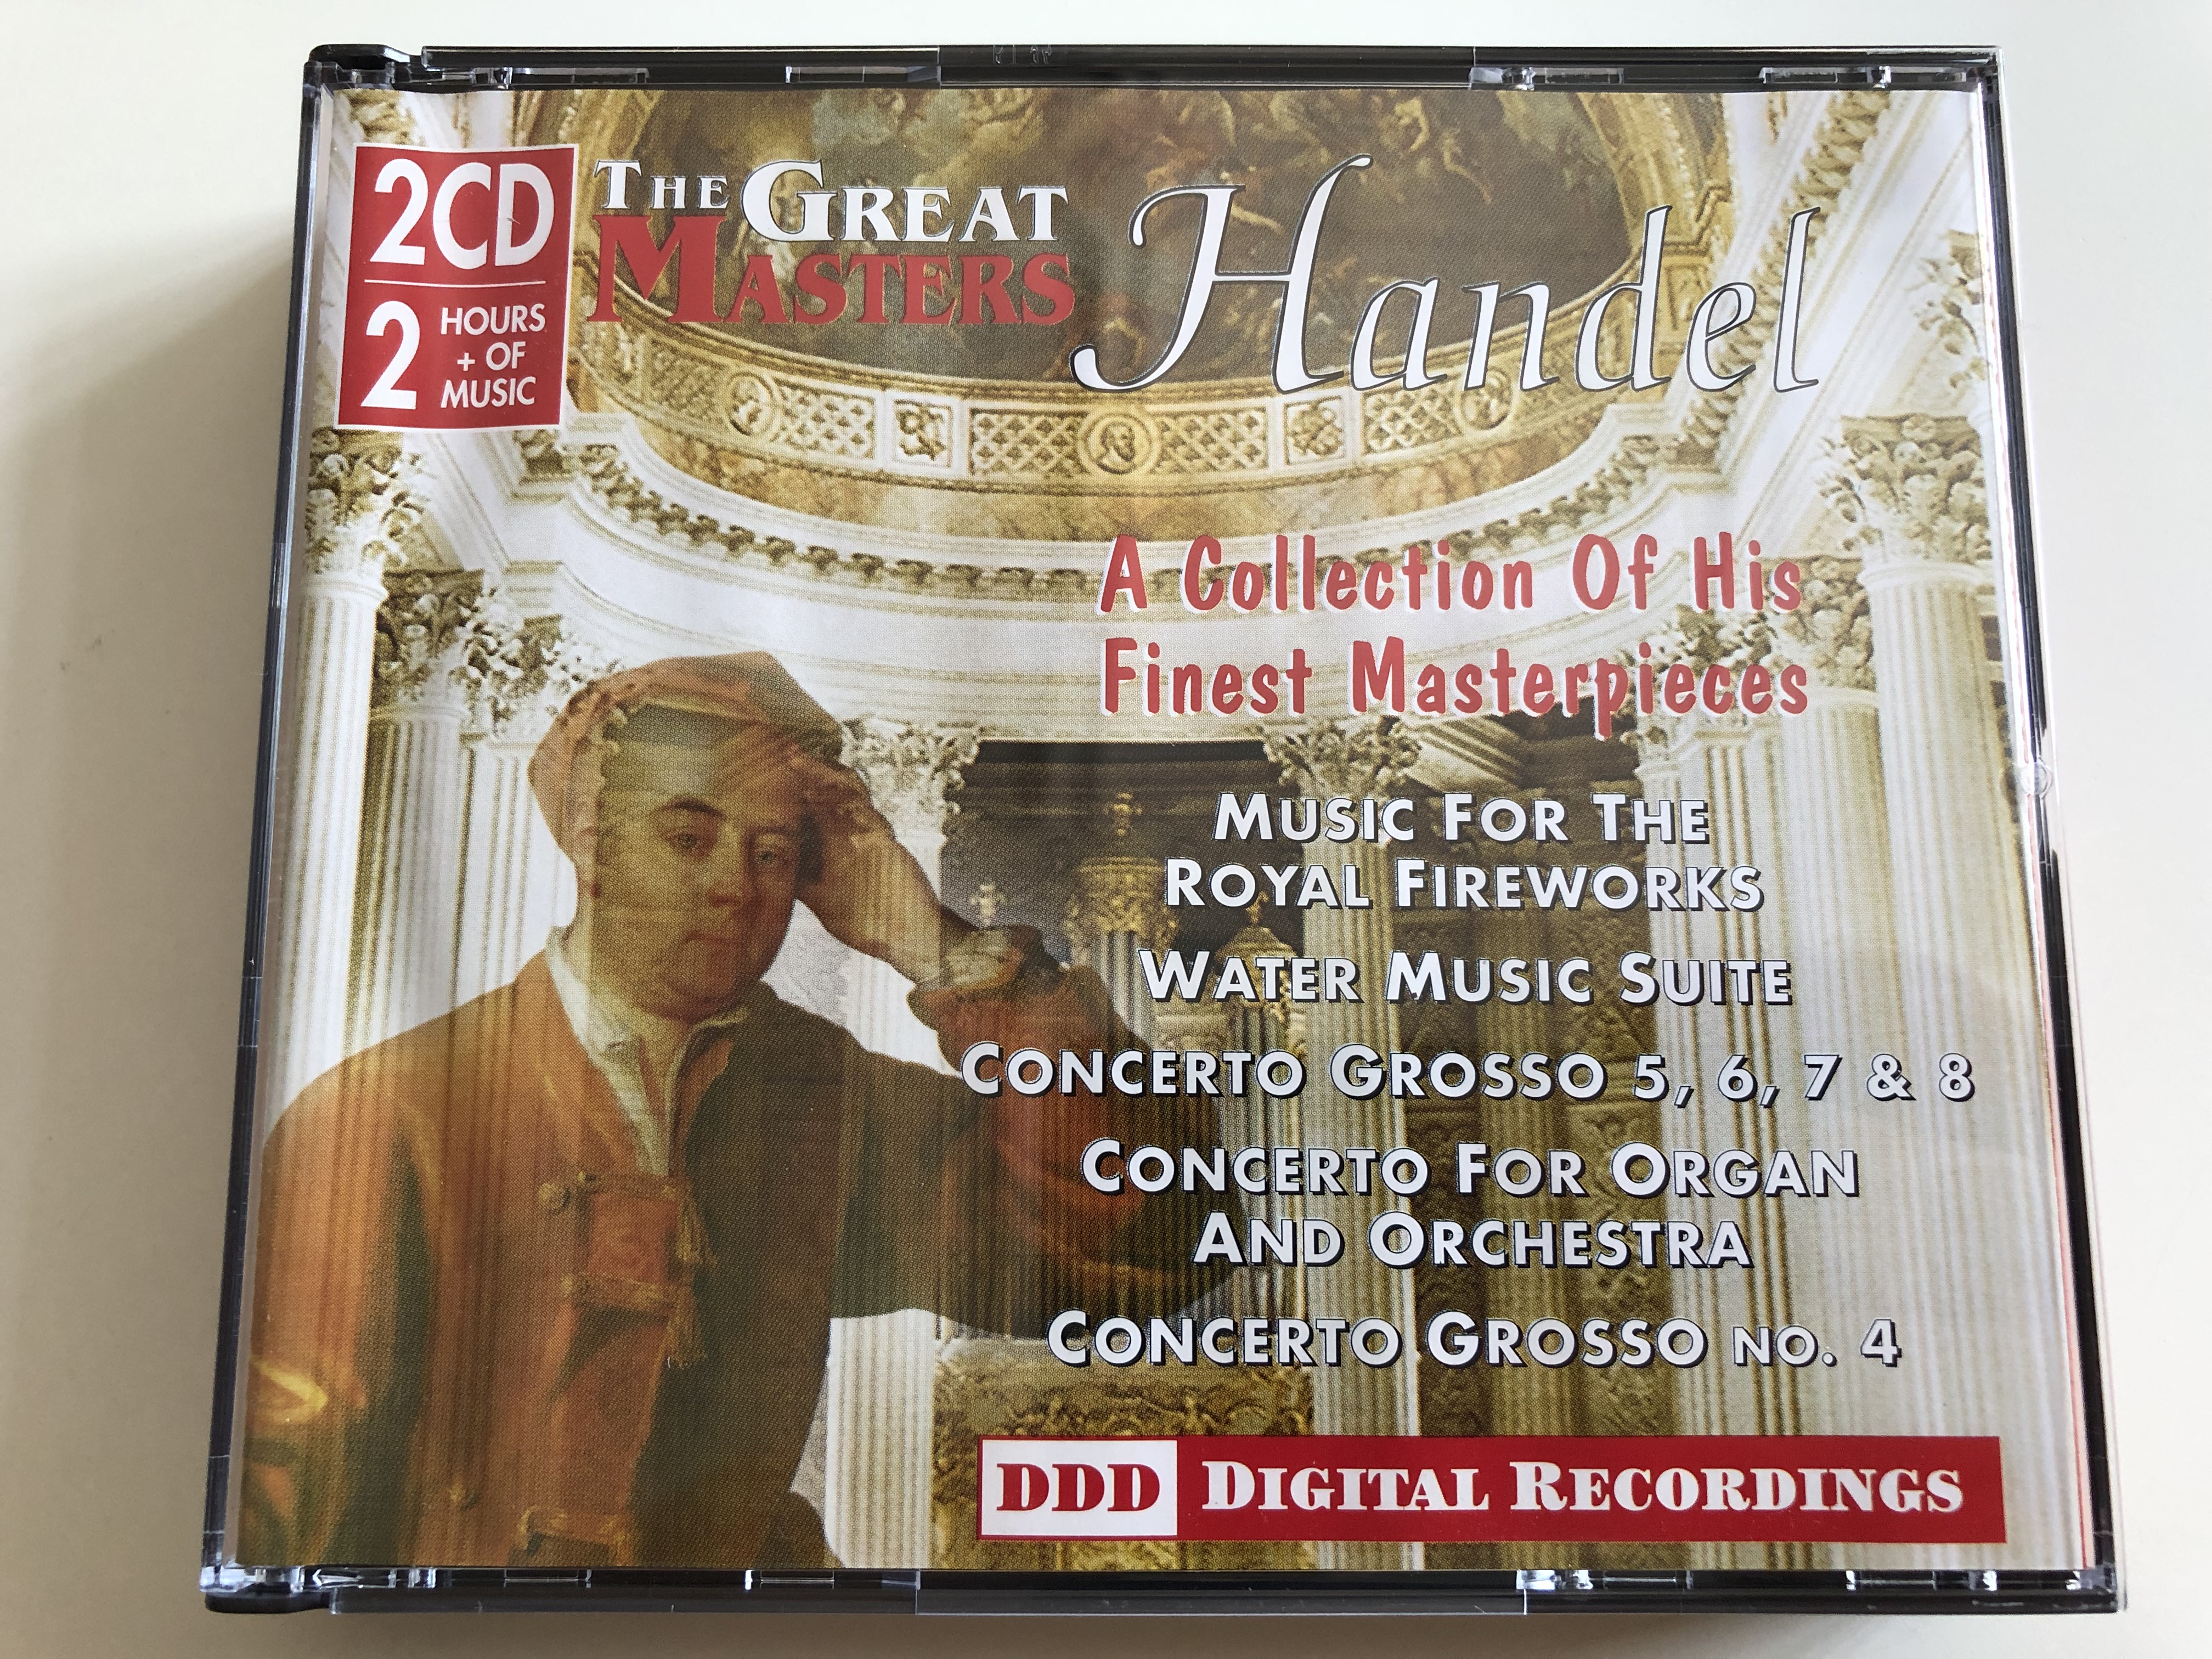 the-great-masters-handel-a-collection-of-his-finest-masterpieces-music-for-the-royal-fireworks-water-music-suite-2-cd-2-hours-of-music-sp-12072-1-.jpg